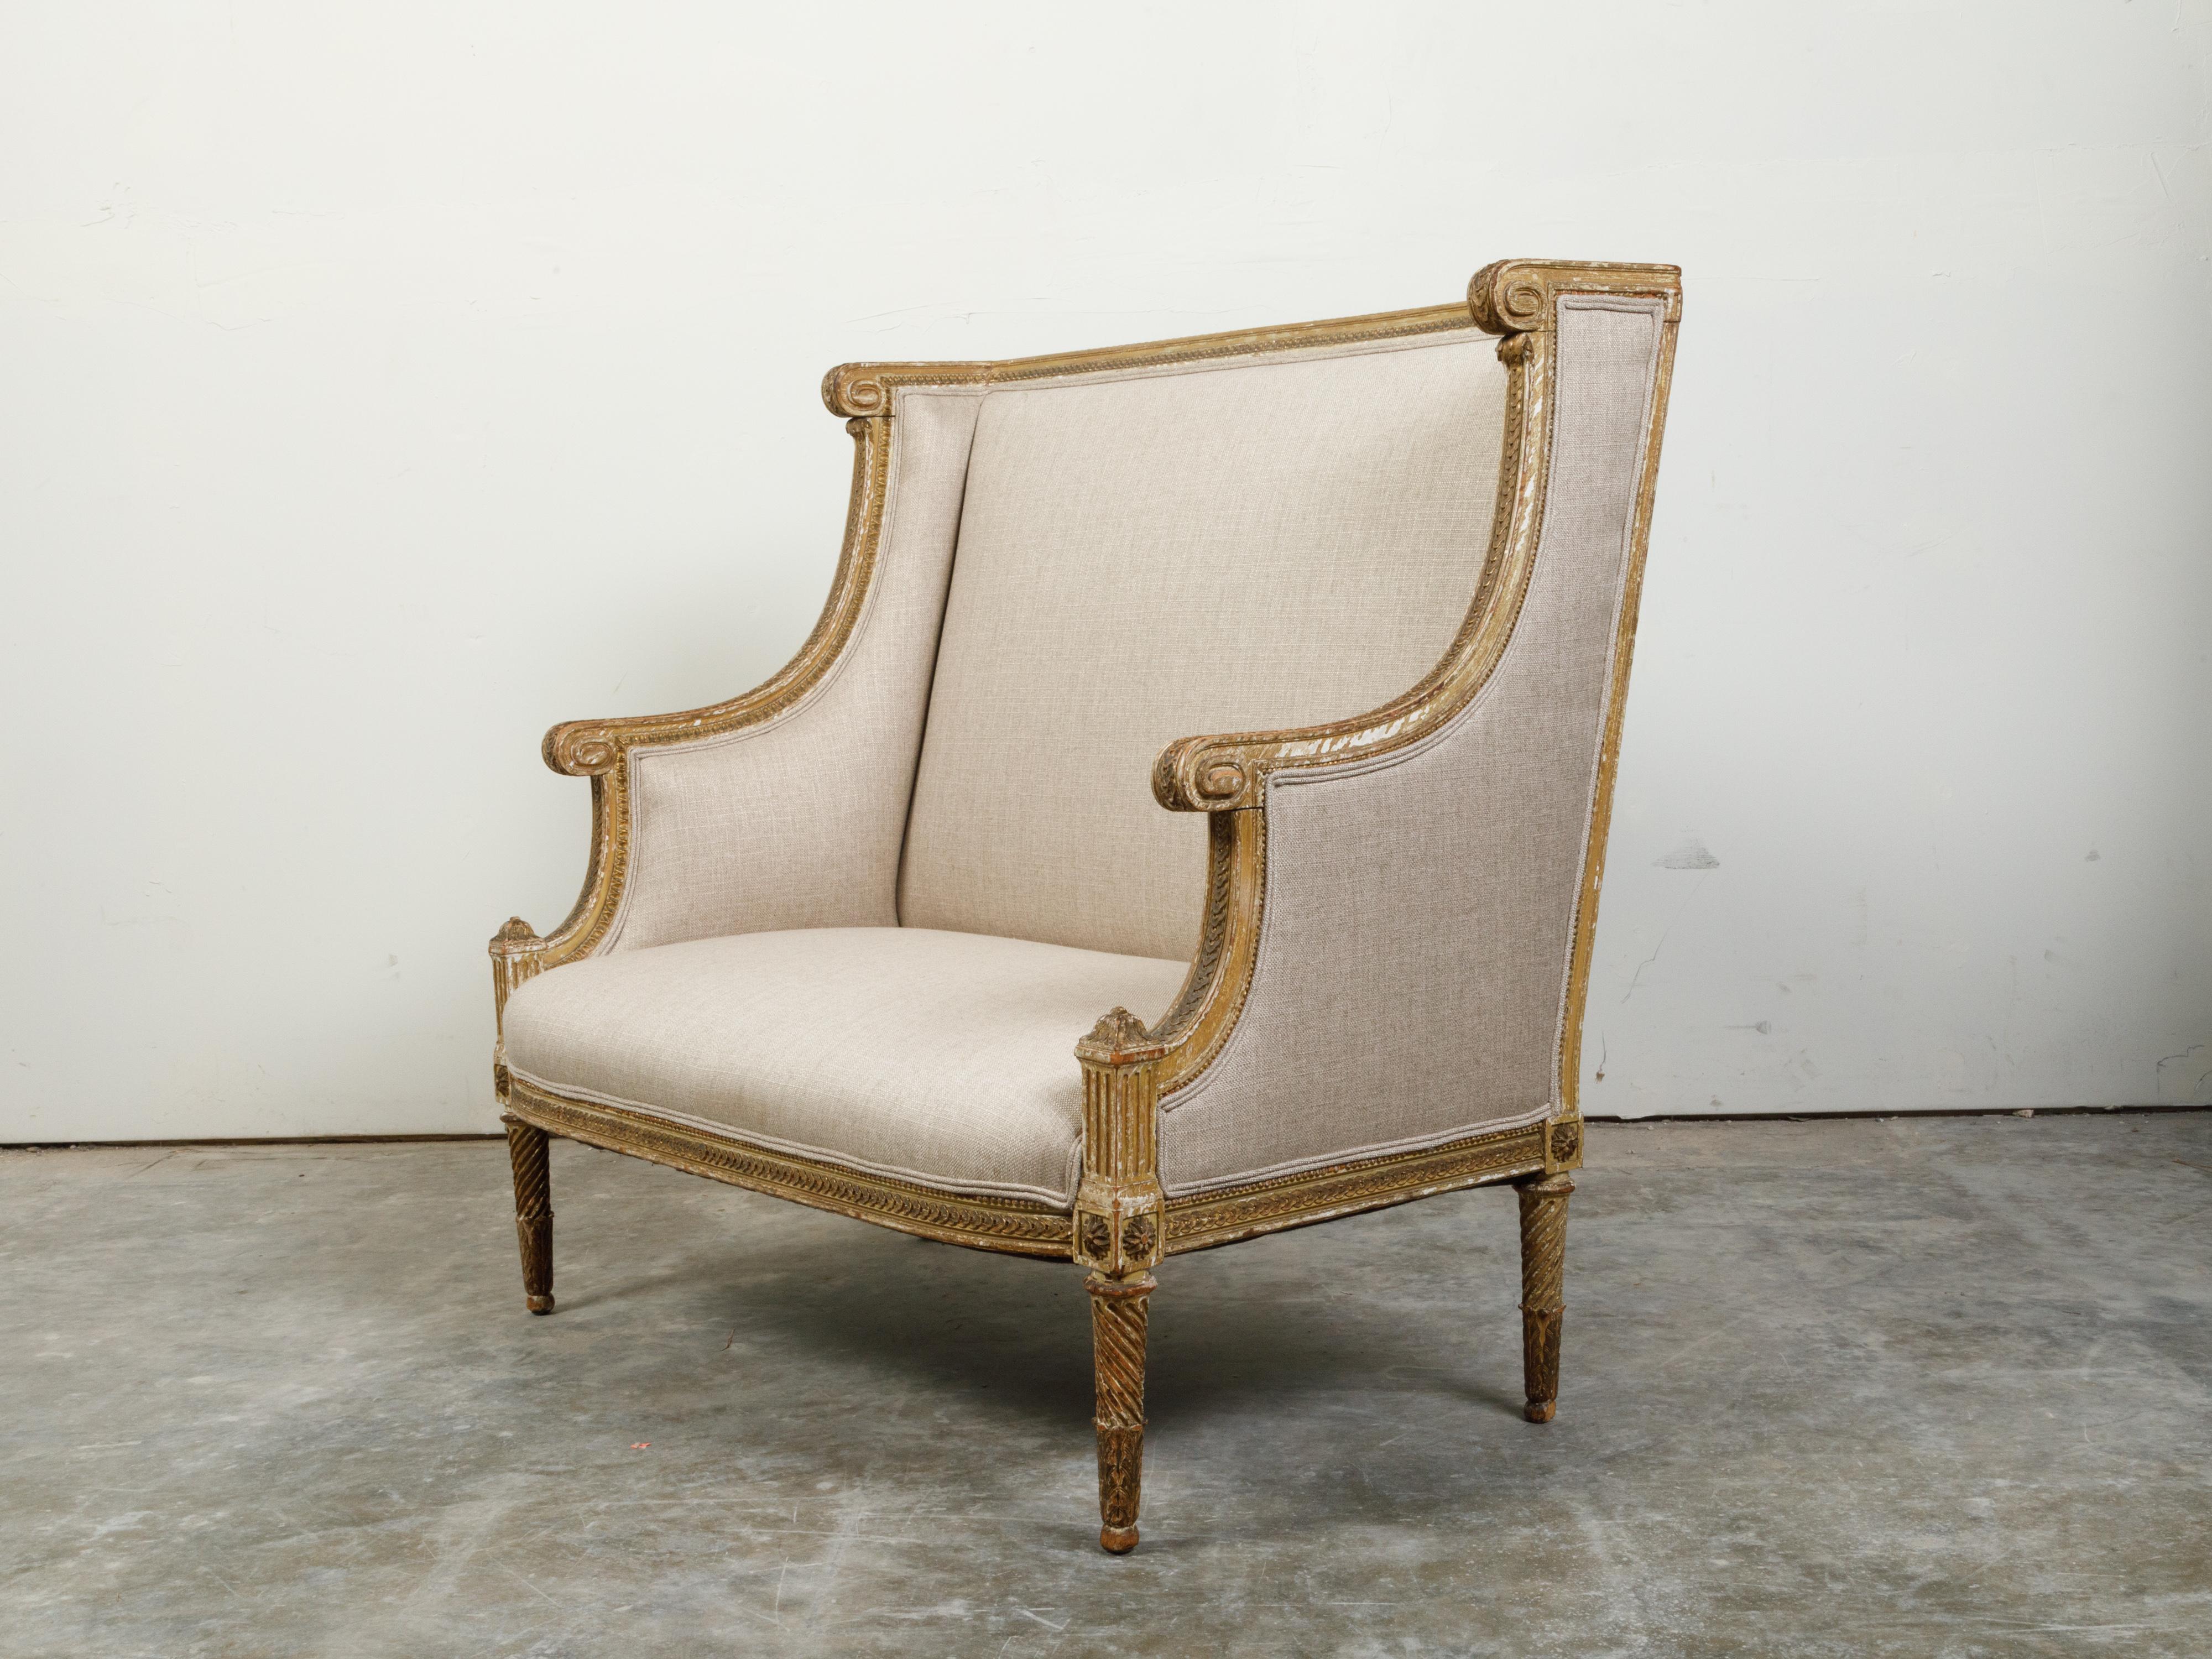 French 19th Century Louis XVI Style Giltwood Wingback Settee with Carved Motifs For Sale 3